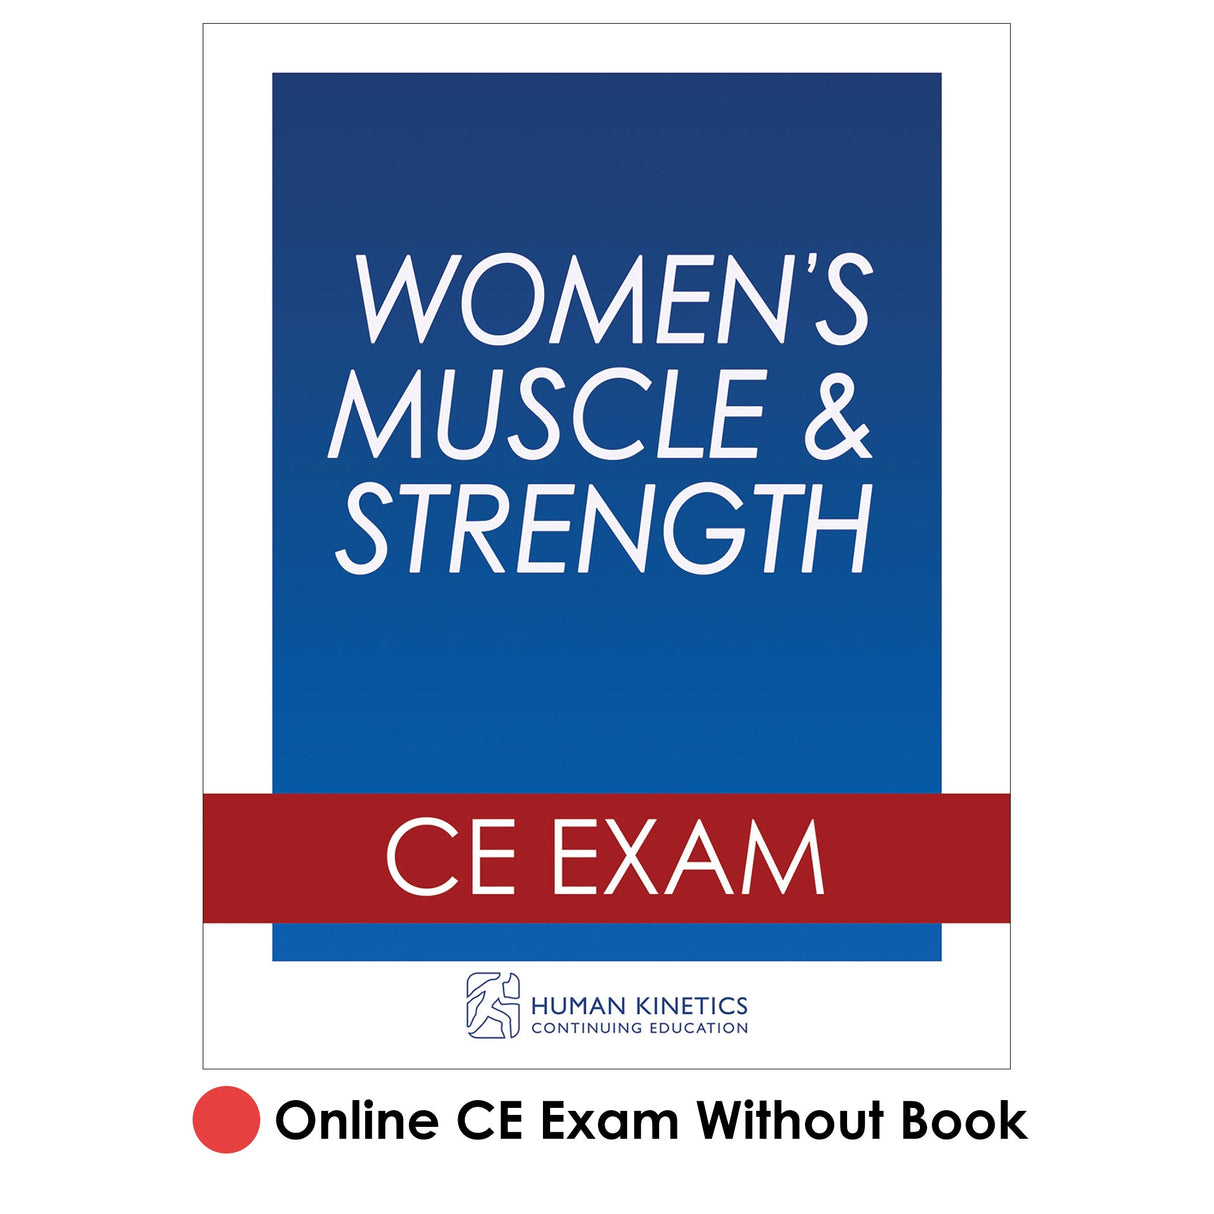 Women’s Muscle & Strength Online CE Exam Without Book